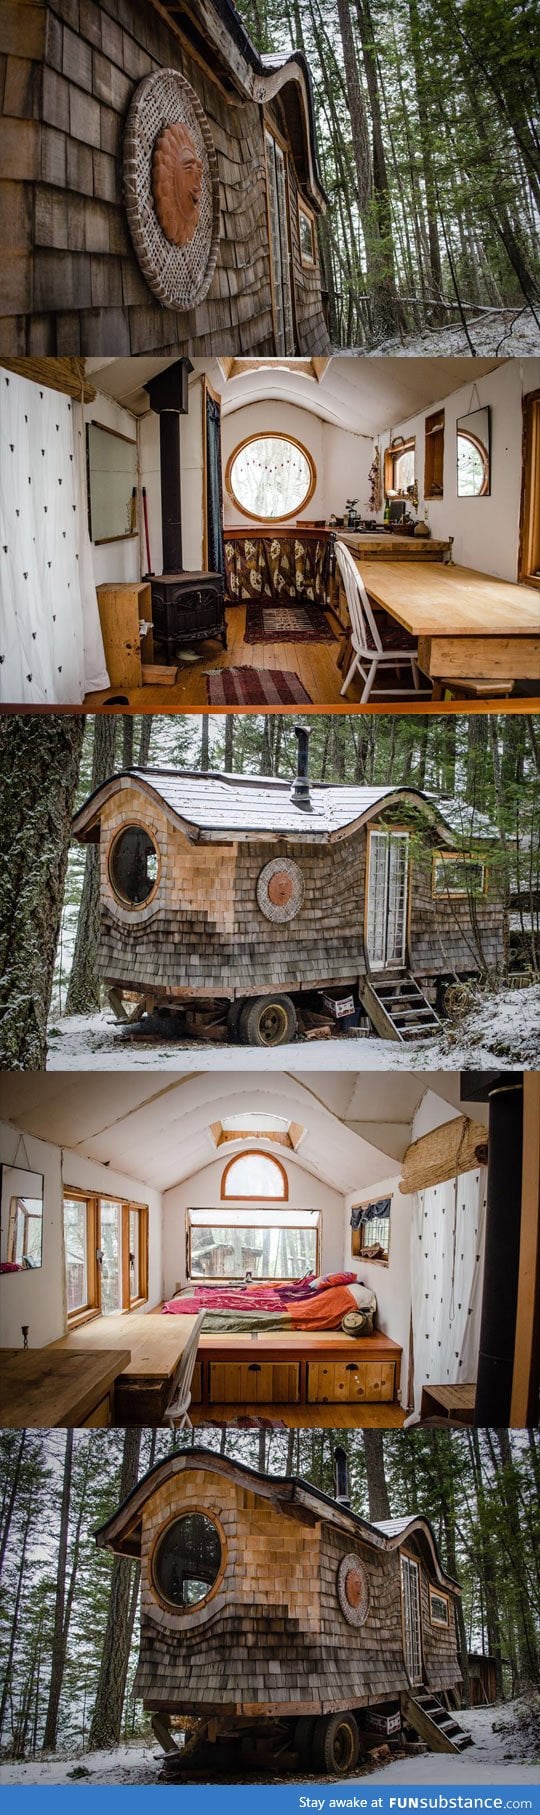 Just a tiny home